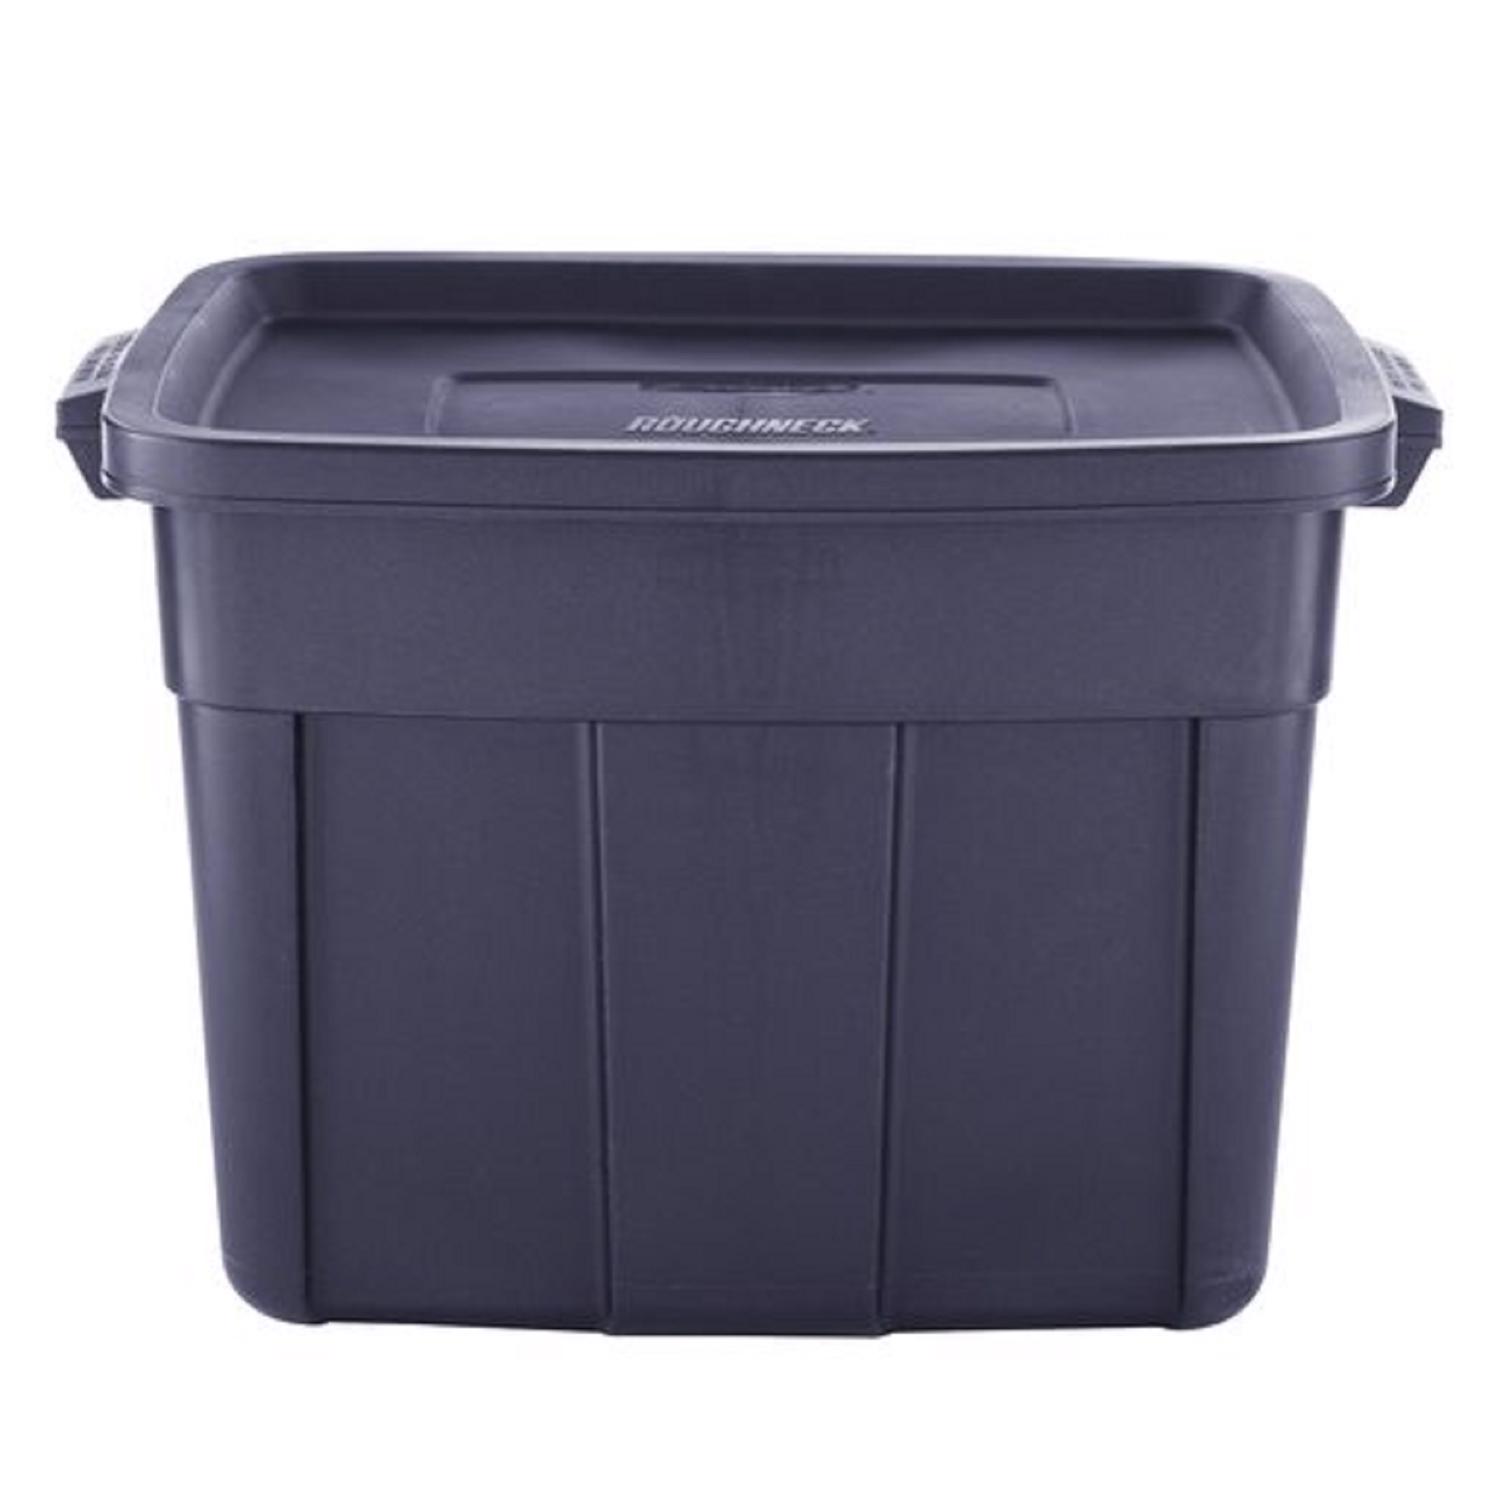 Rubbermaid® Roughneck™ Storage Box - Candor Janitorial Supply